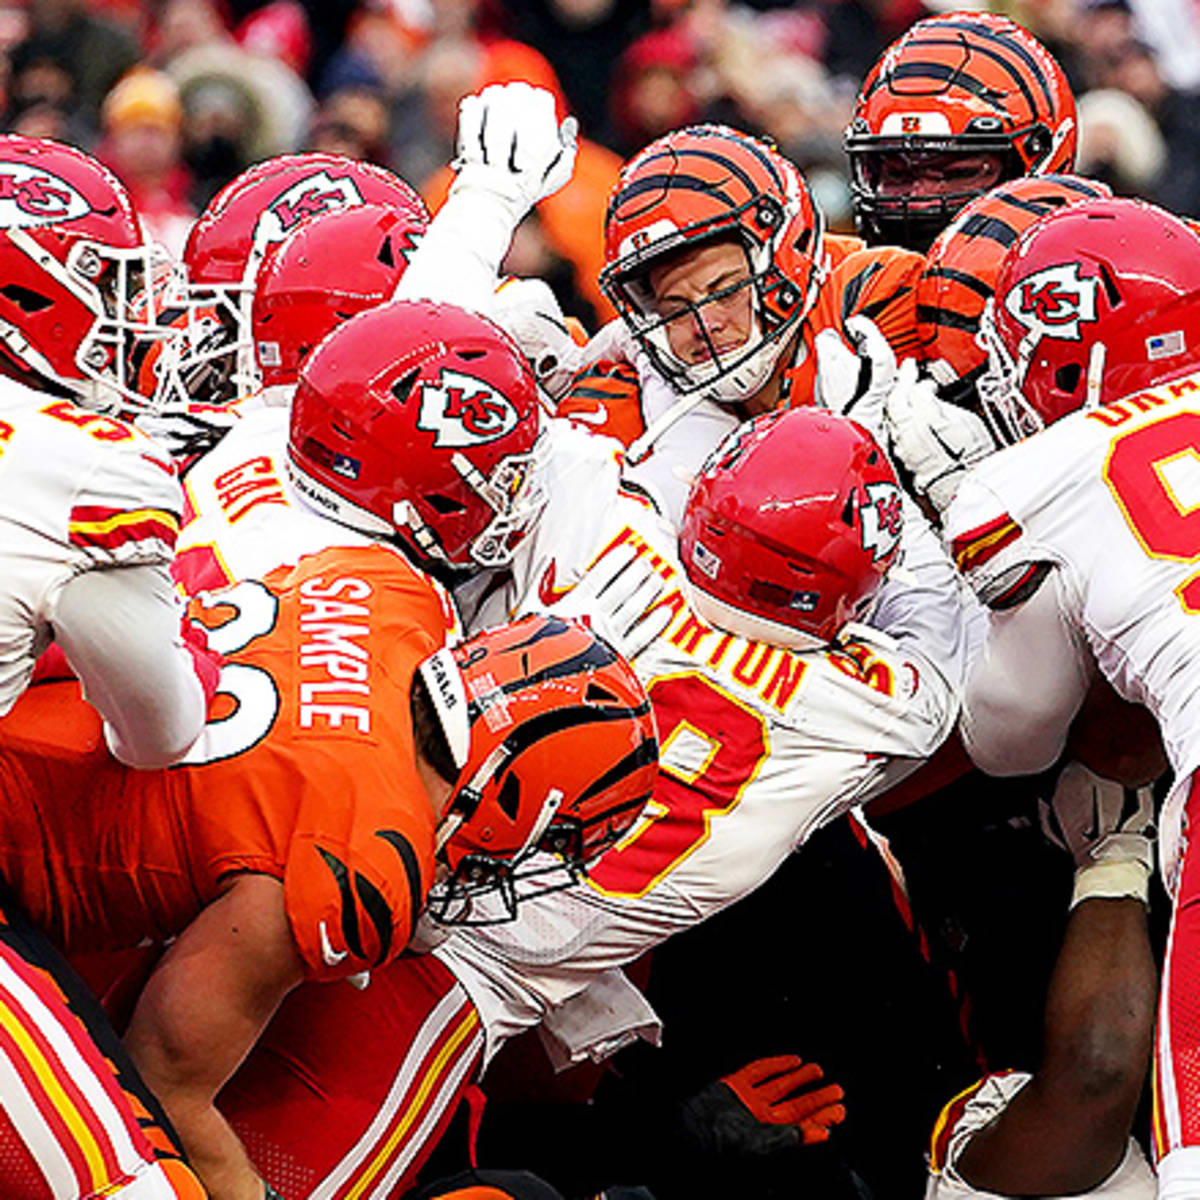 kc chiefs and bengals